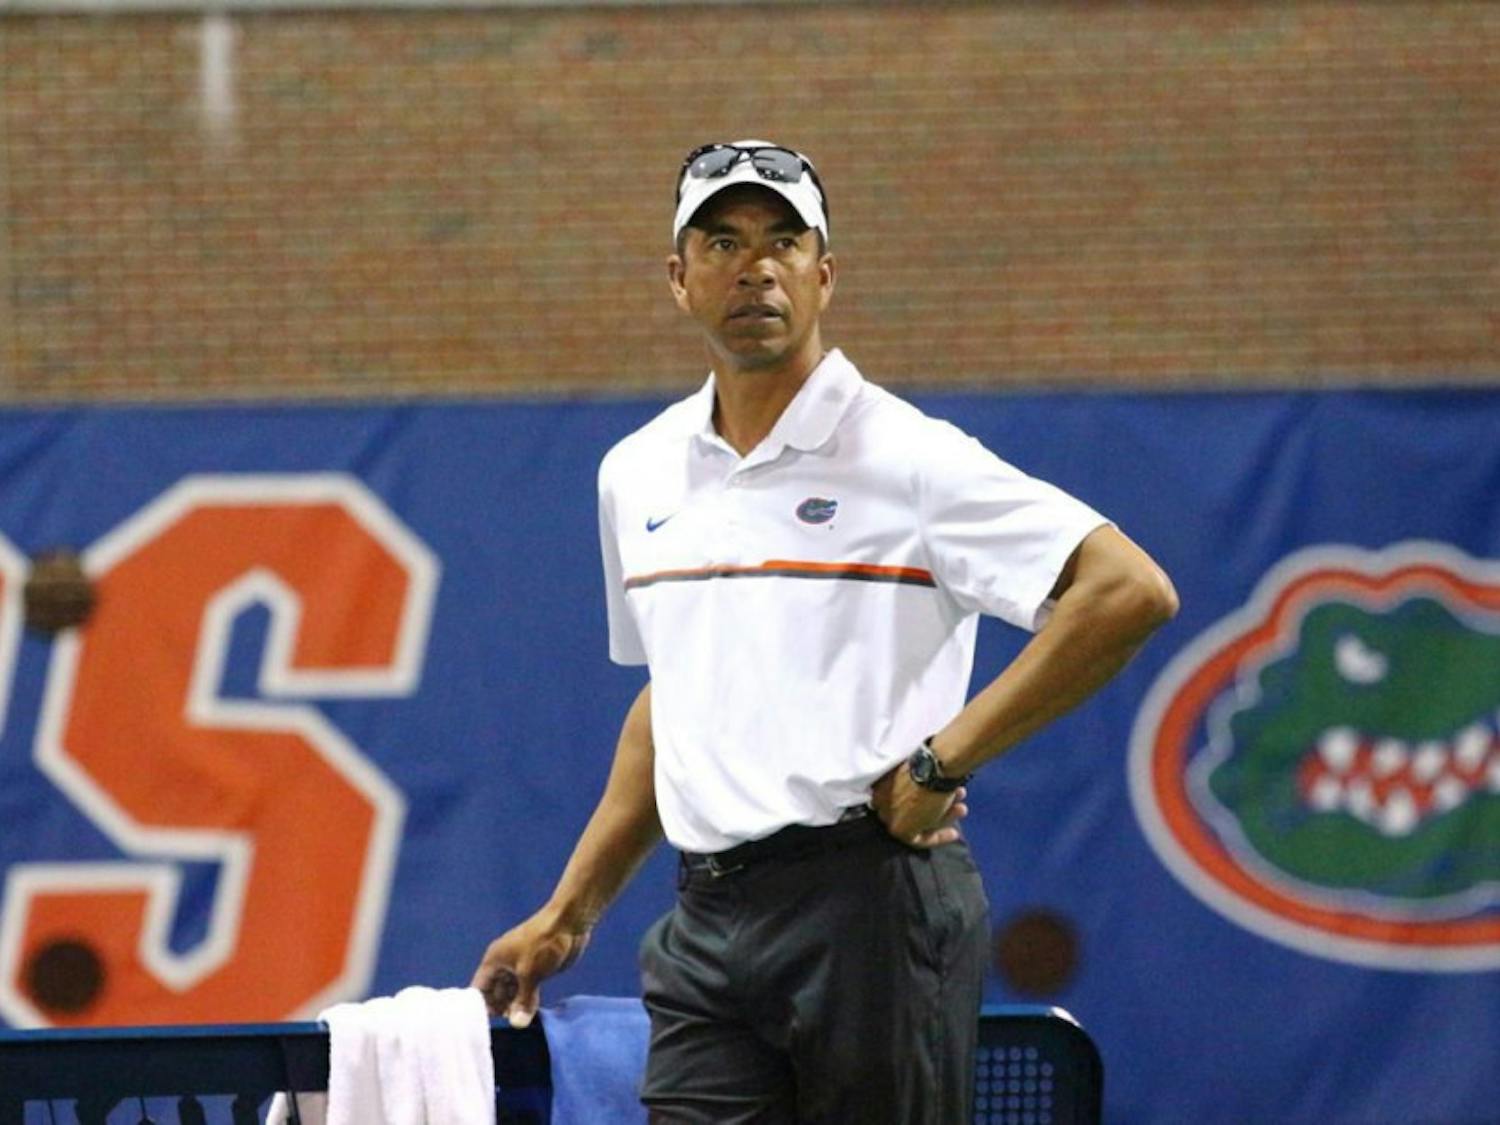 Bryan Shelton was modest after earning his 100th career win as Florida's coach.&nbsp;“I don't hit a single ball in these matches so the players are the ones that should get the credit,” he said.&nbsp;